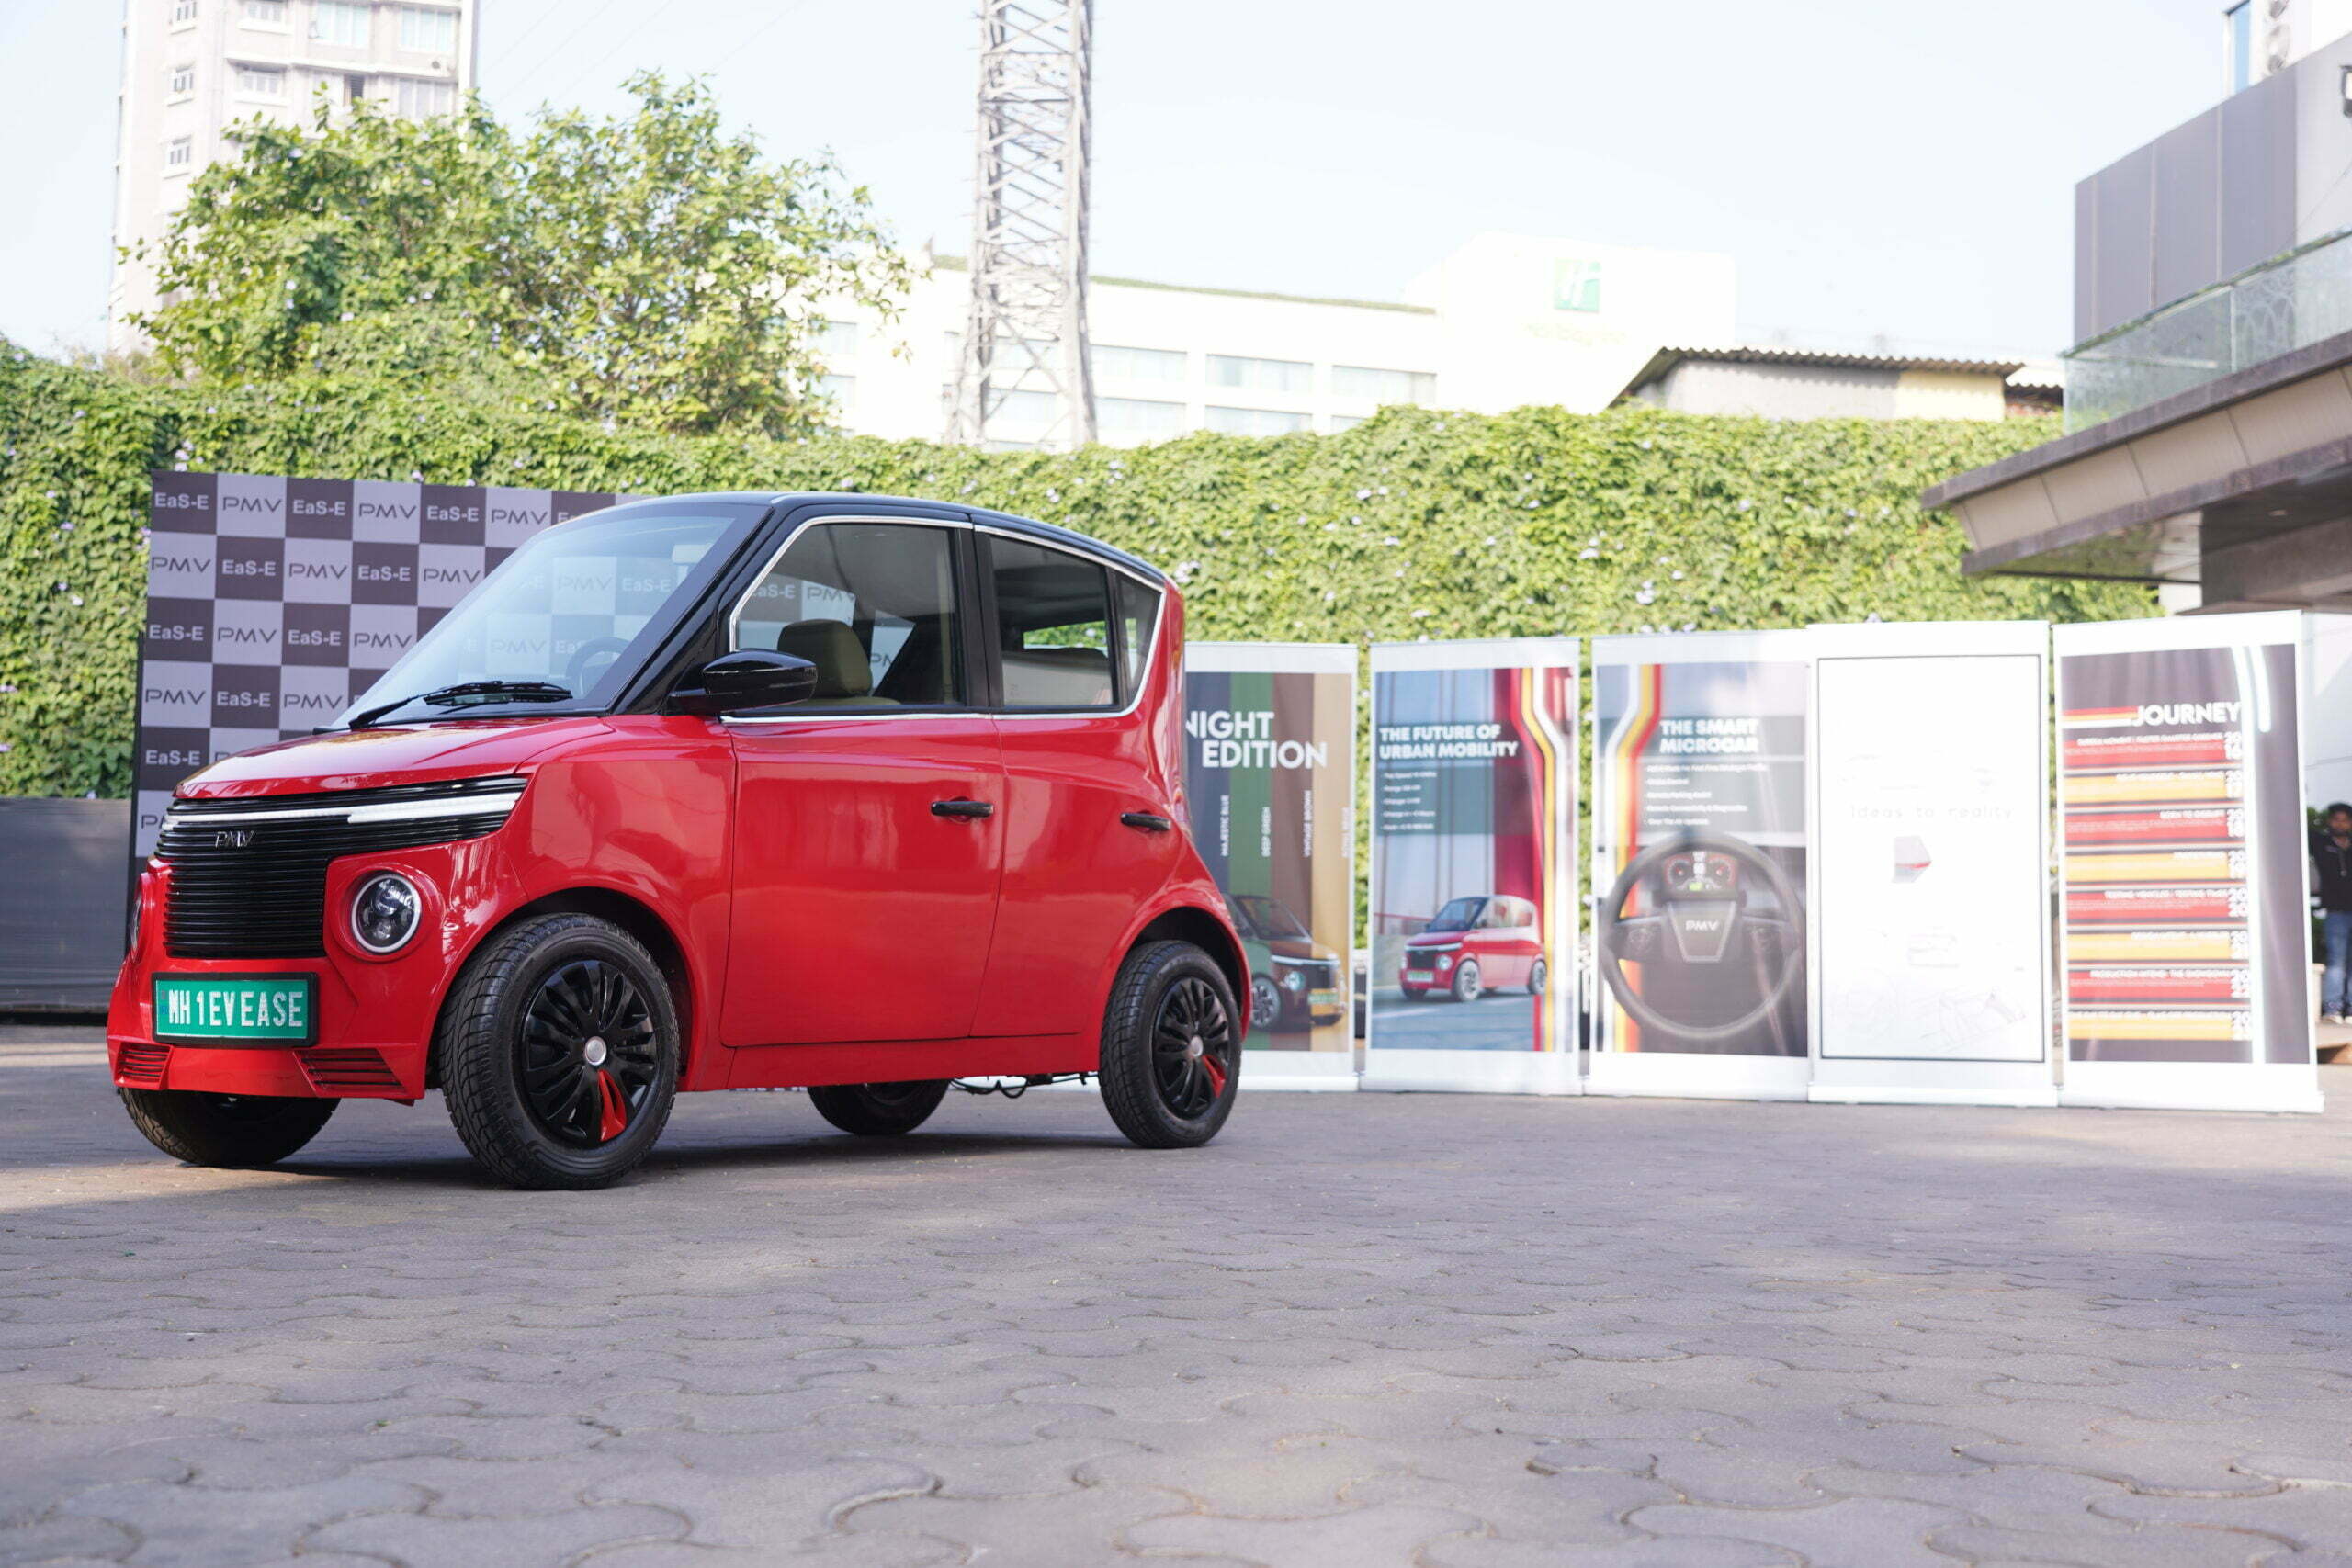 PMV Electric Car EASE - Could Be India's Smallest 4W EV (1)